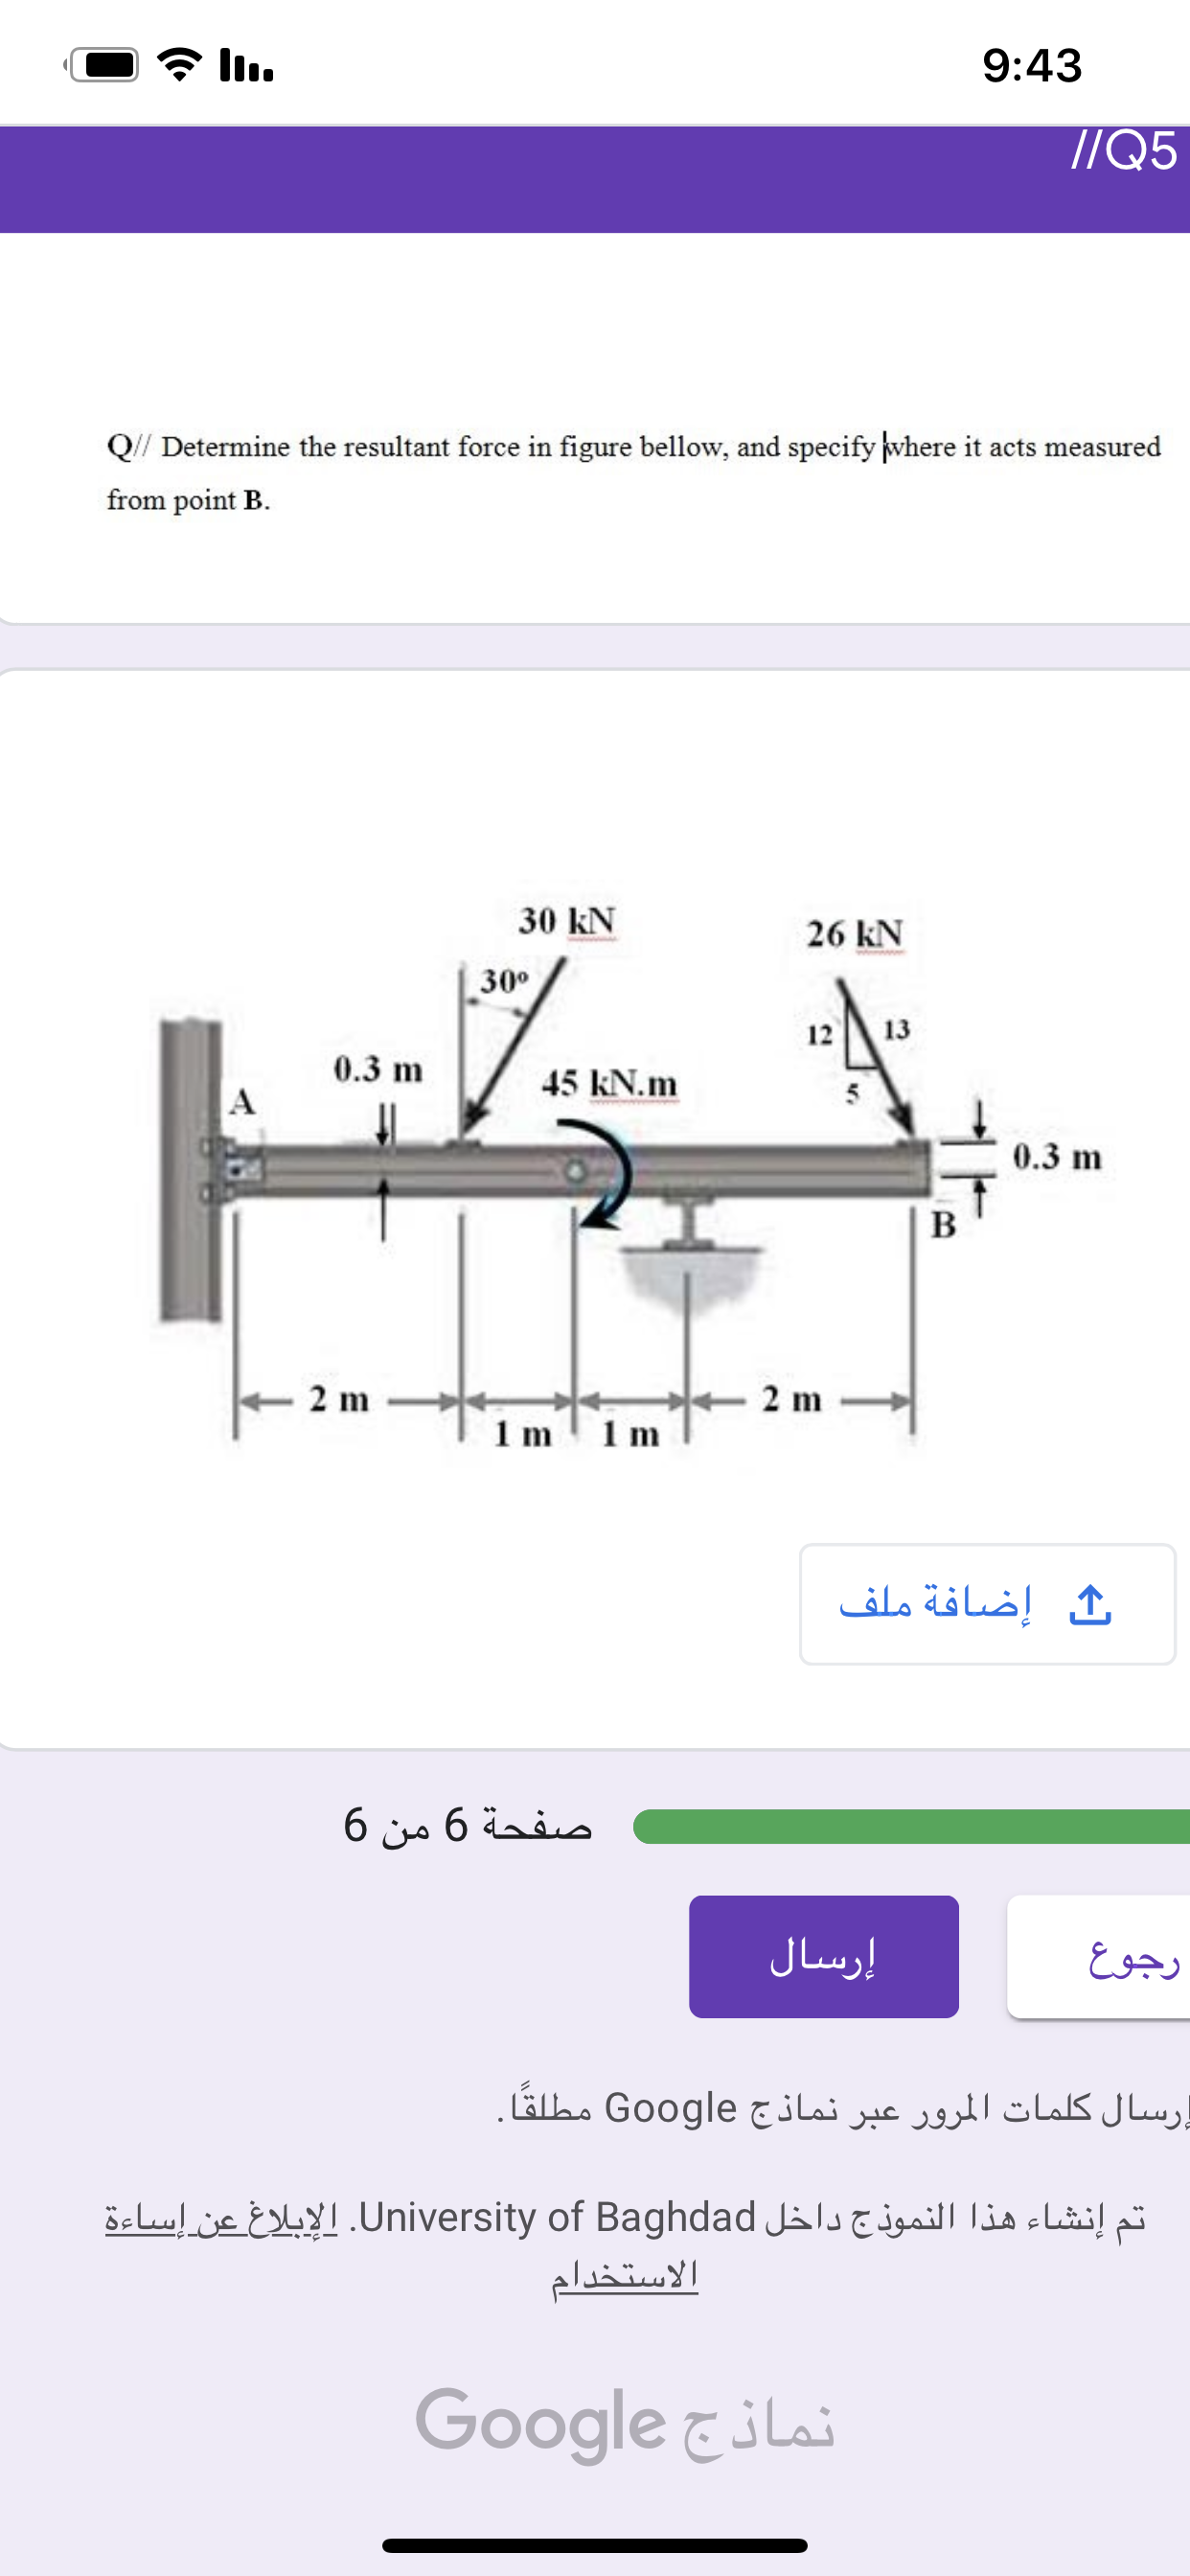 Q// Determine the resultant force in figure bellow, and specify where it acts measured
from point B.
30 kN
26 kN
30°
12
13
0.3 m
45 kN.m
0.3 m
B
2 m
2 m
1 m 1m
